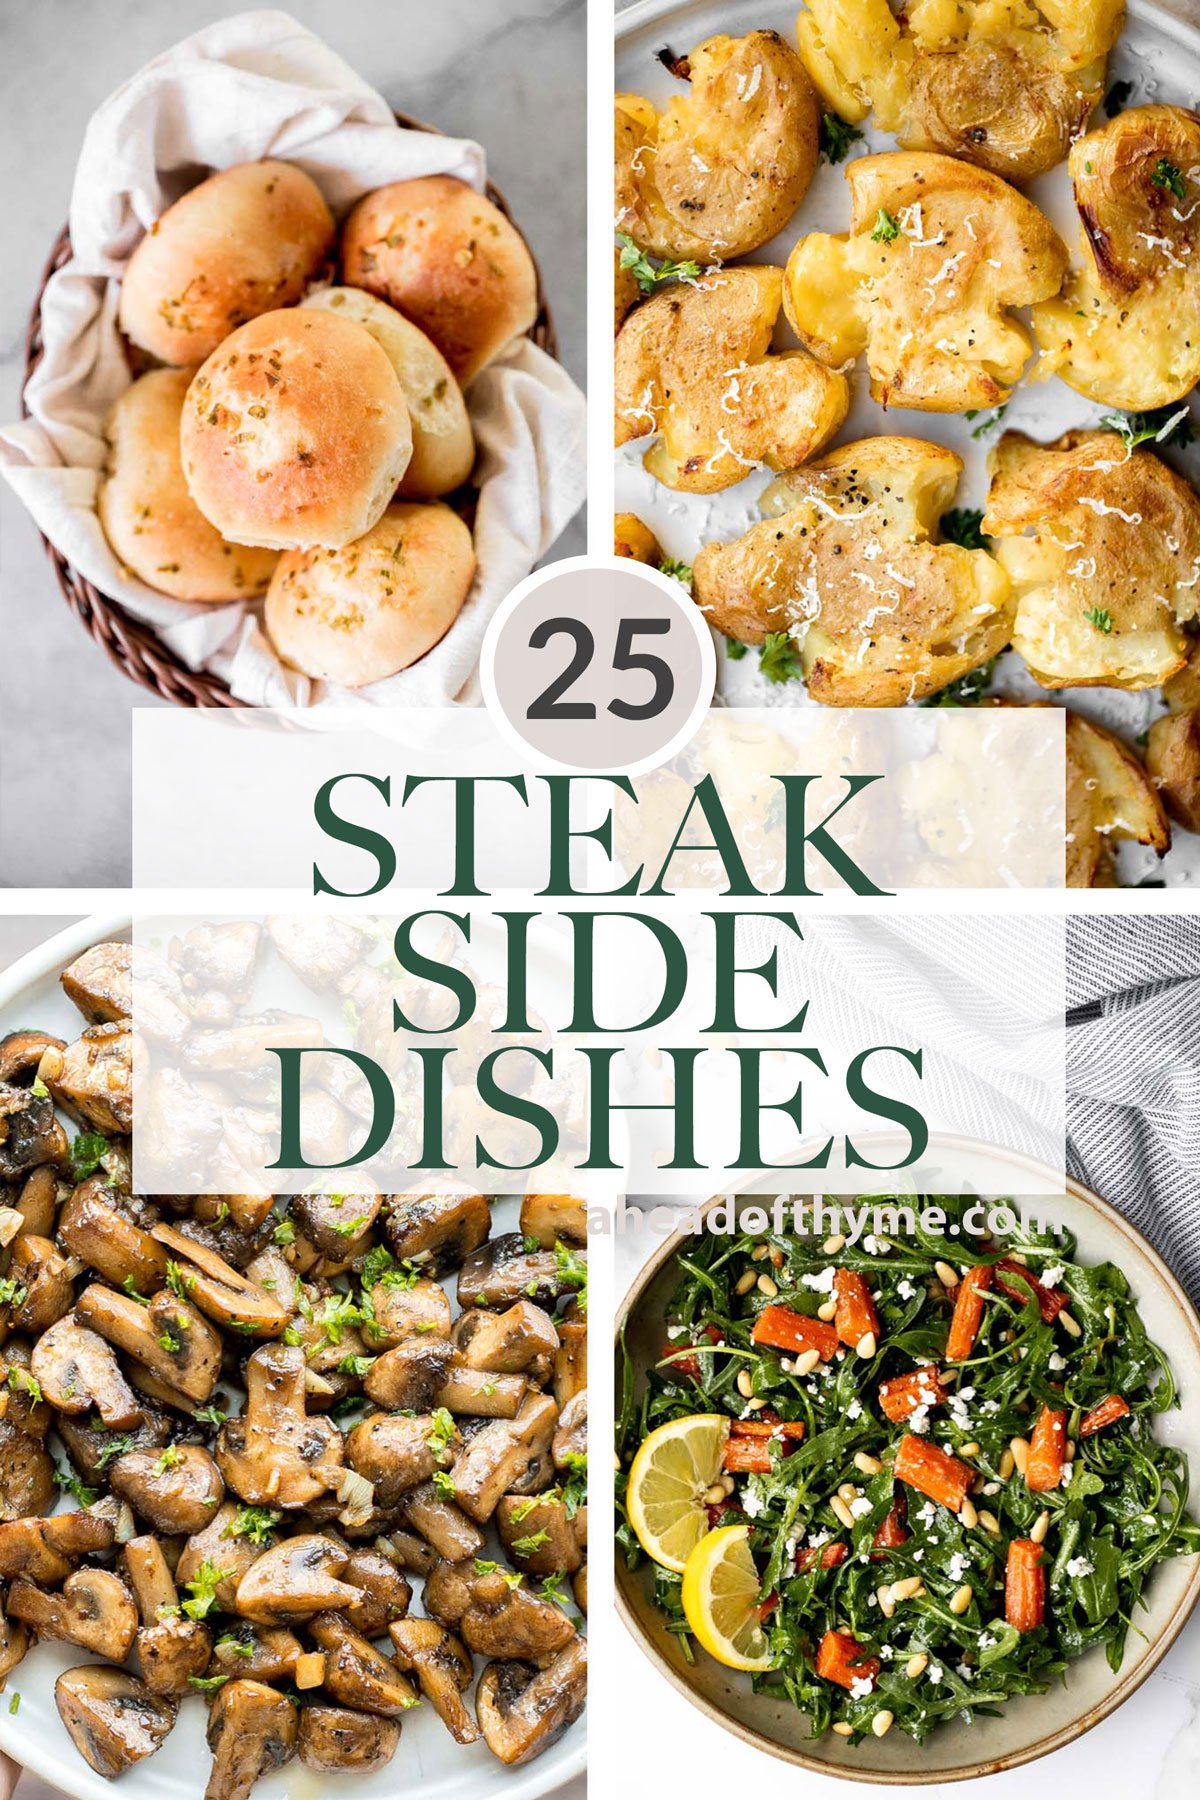 25 Side Dishes for Steak